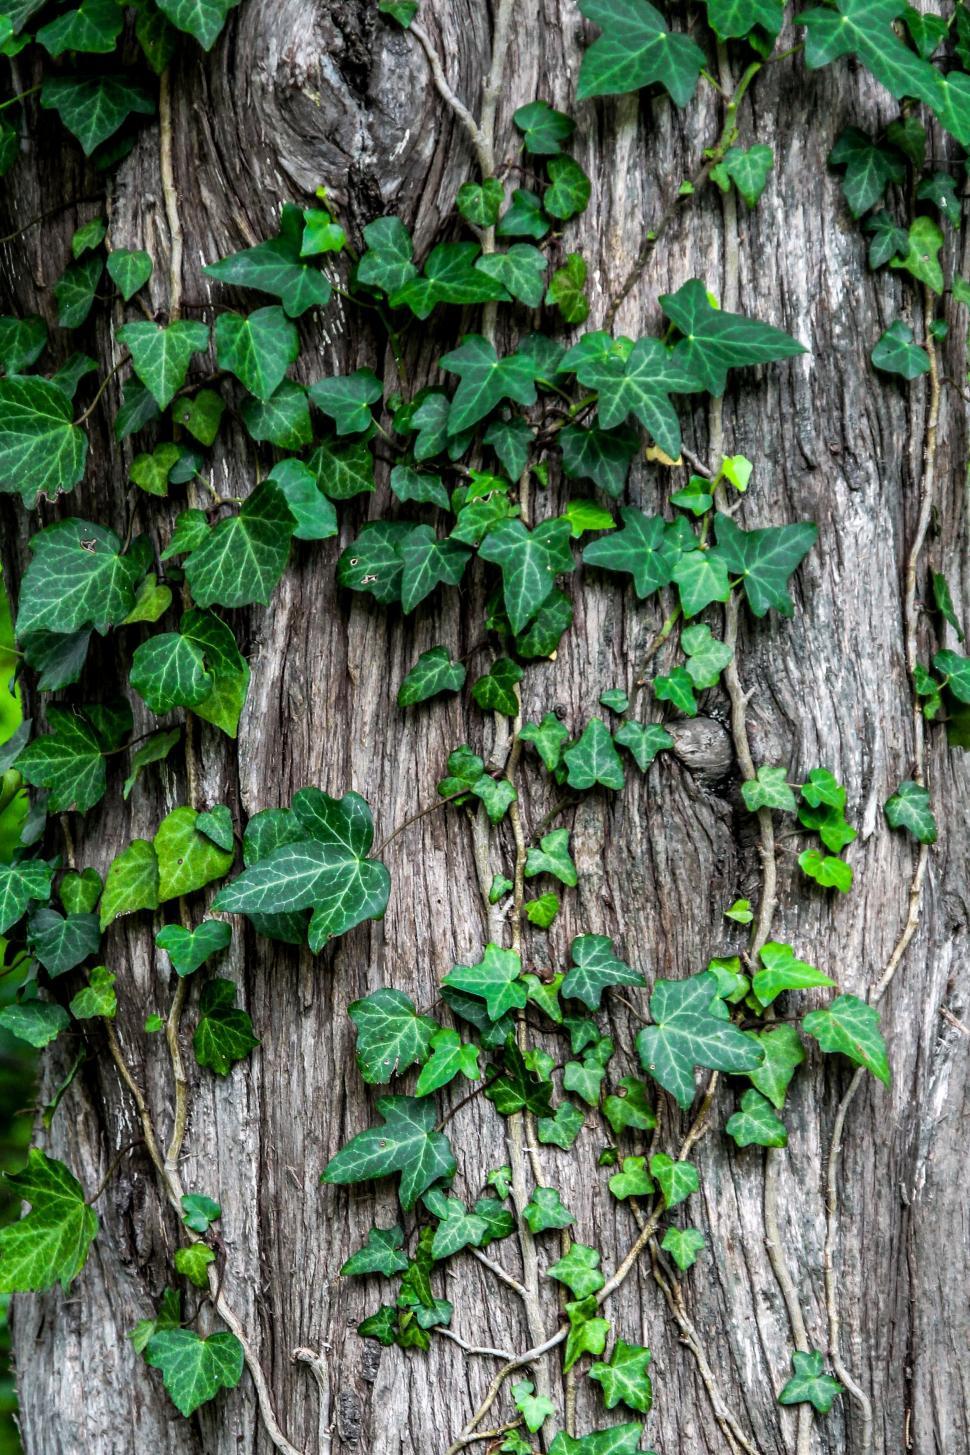 Free Image of Ivy Growing on a Tree Trunk in a Forest 